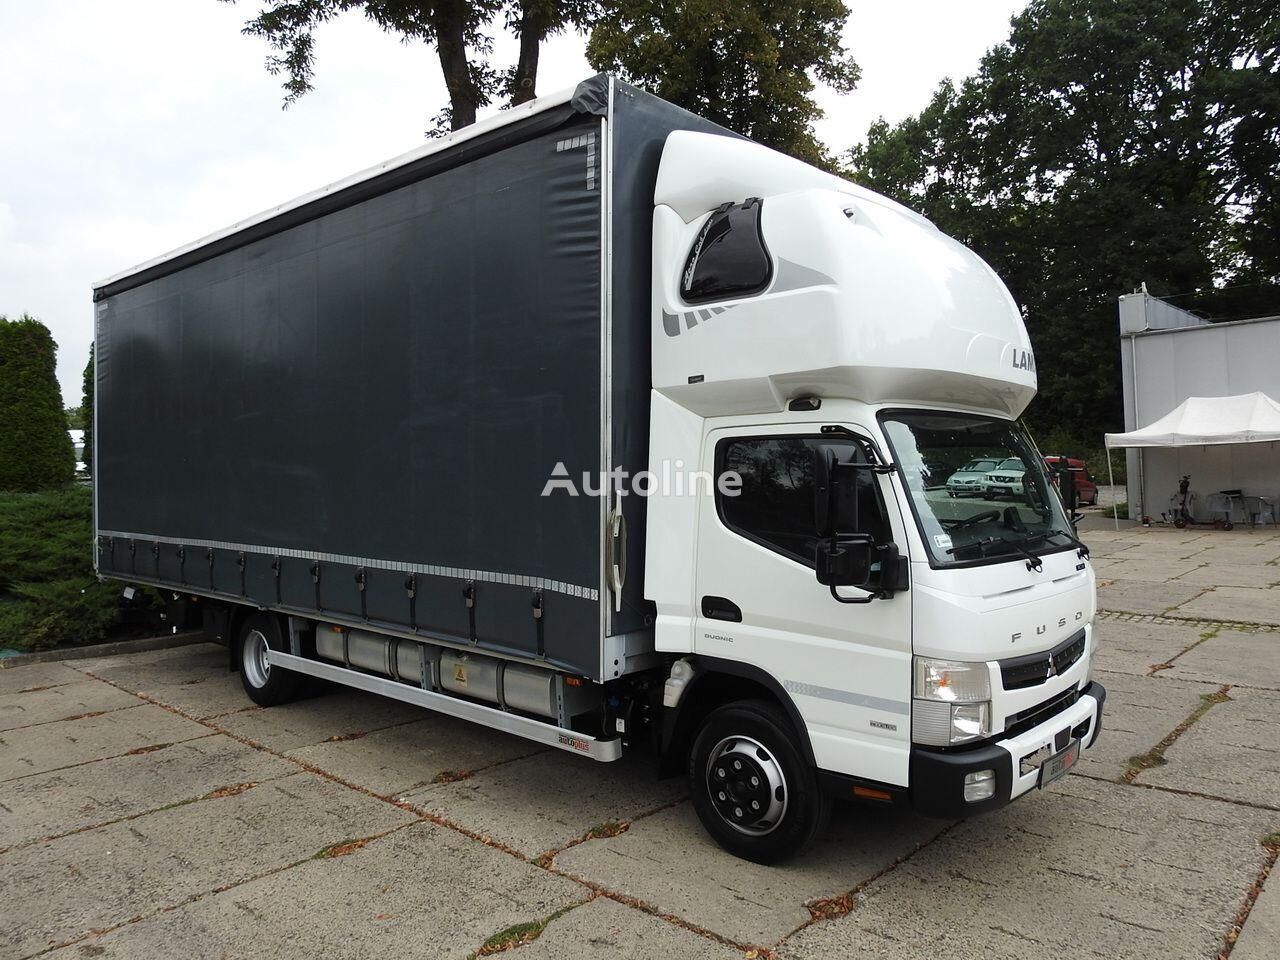 fuso canter 4 2m moving van clipart